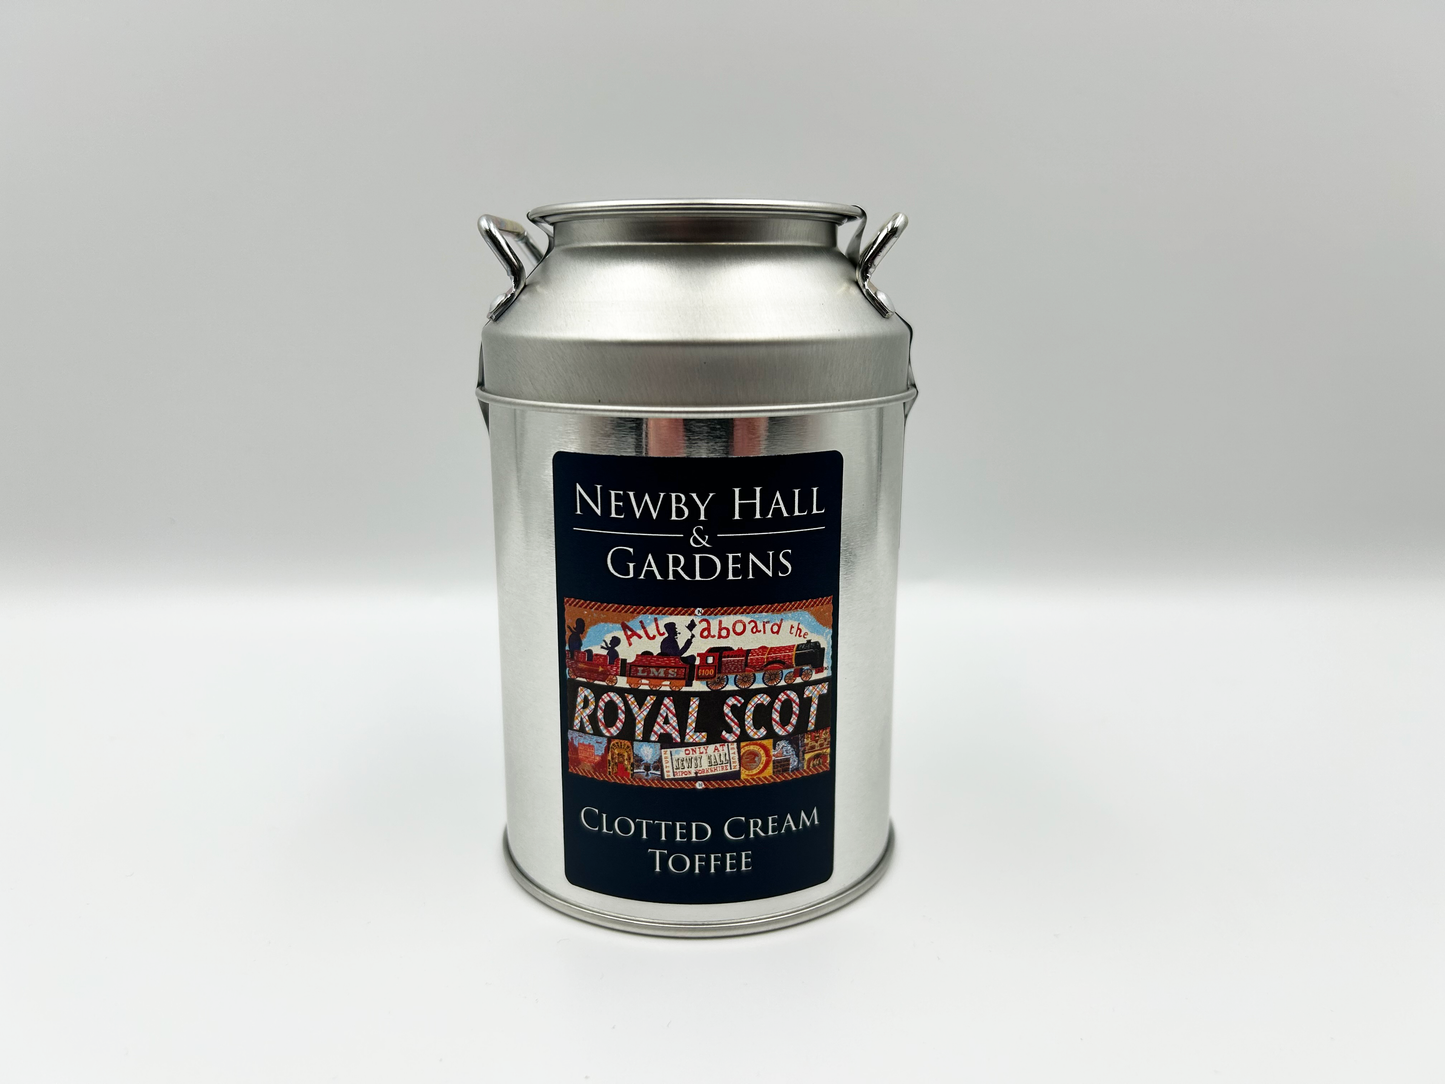 Newby Hall Clotted Cream Toffee